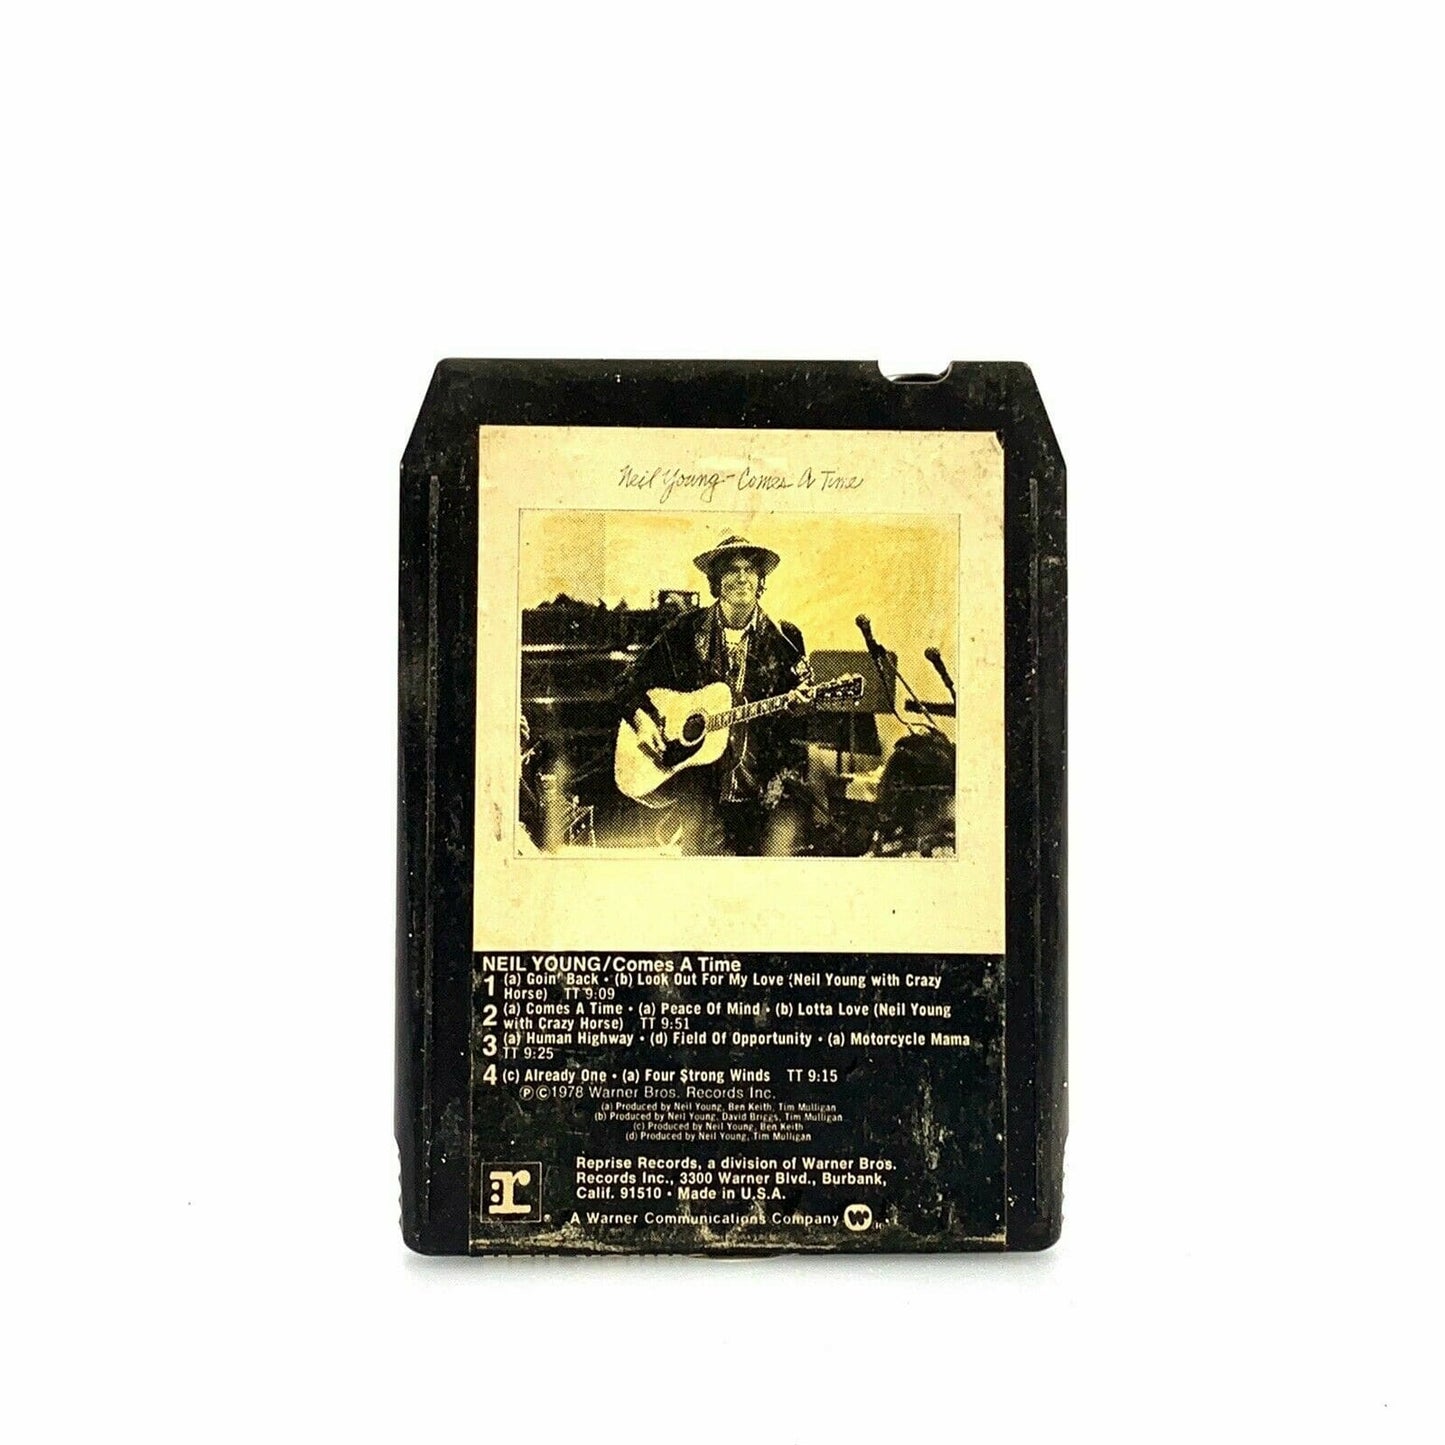 Vintage 8 Track Cartridge - Neil Young “Comes A Time”